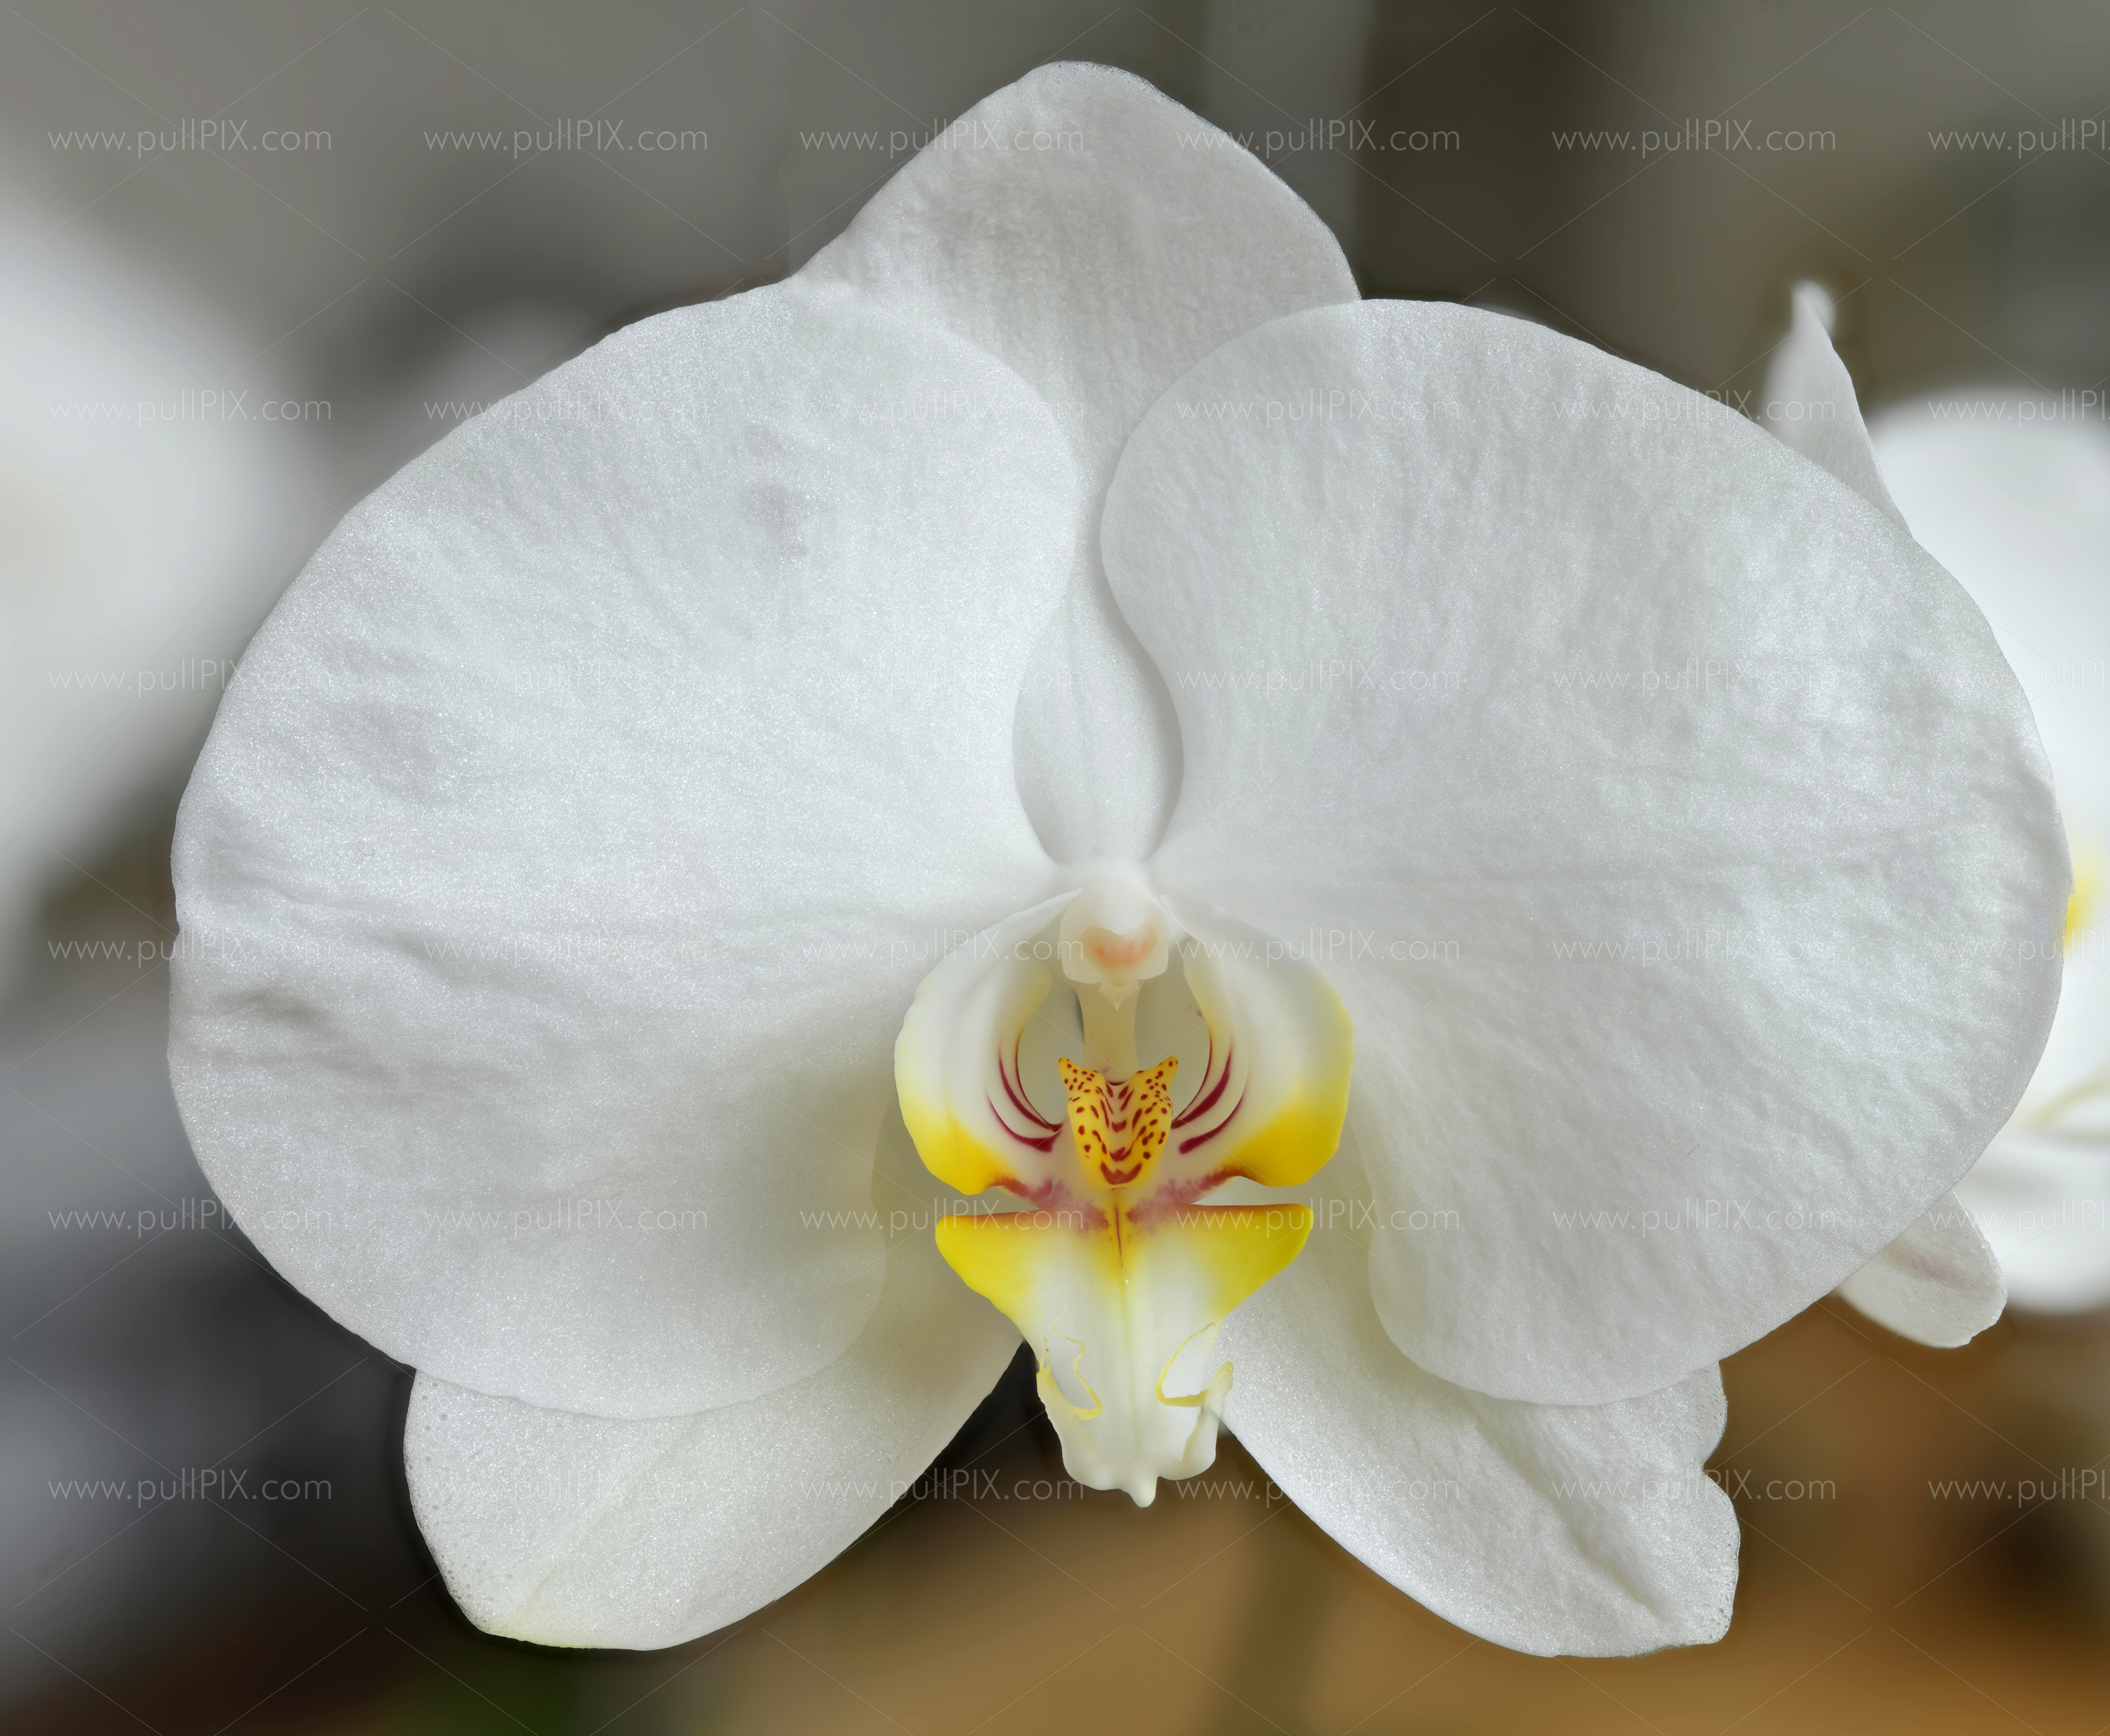 Preview weisse orchidee.jpg